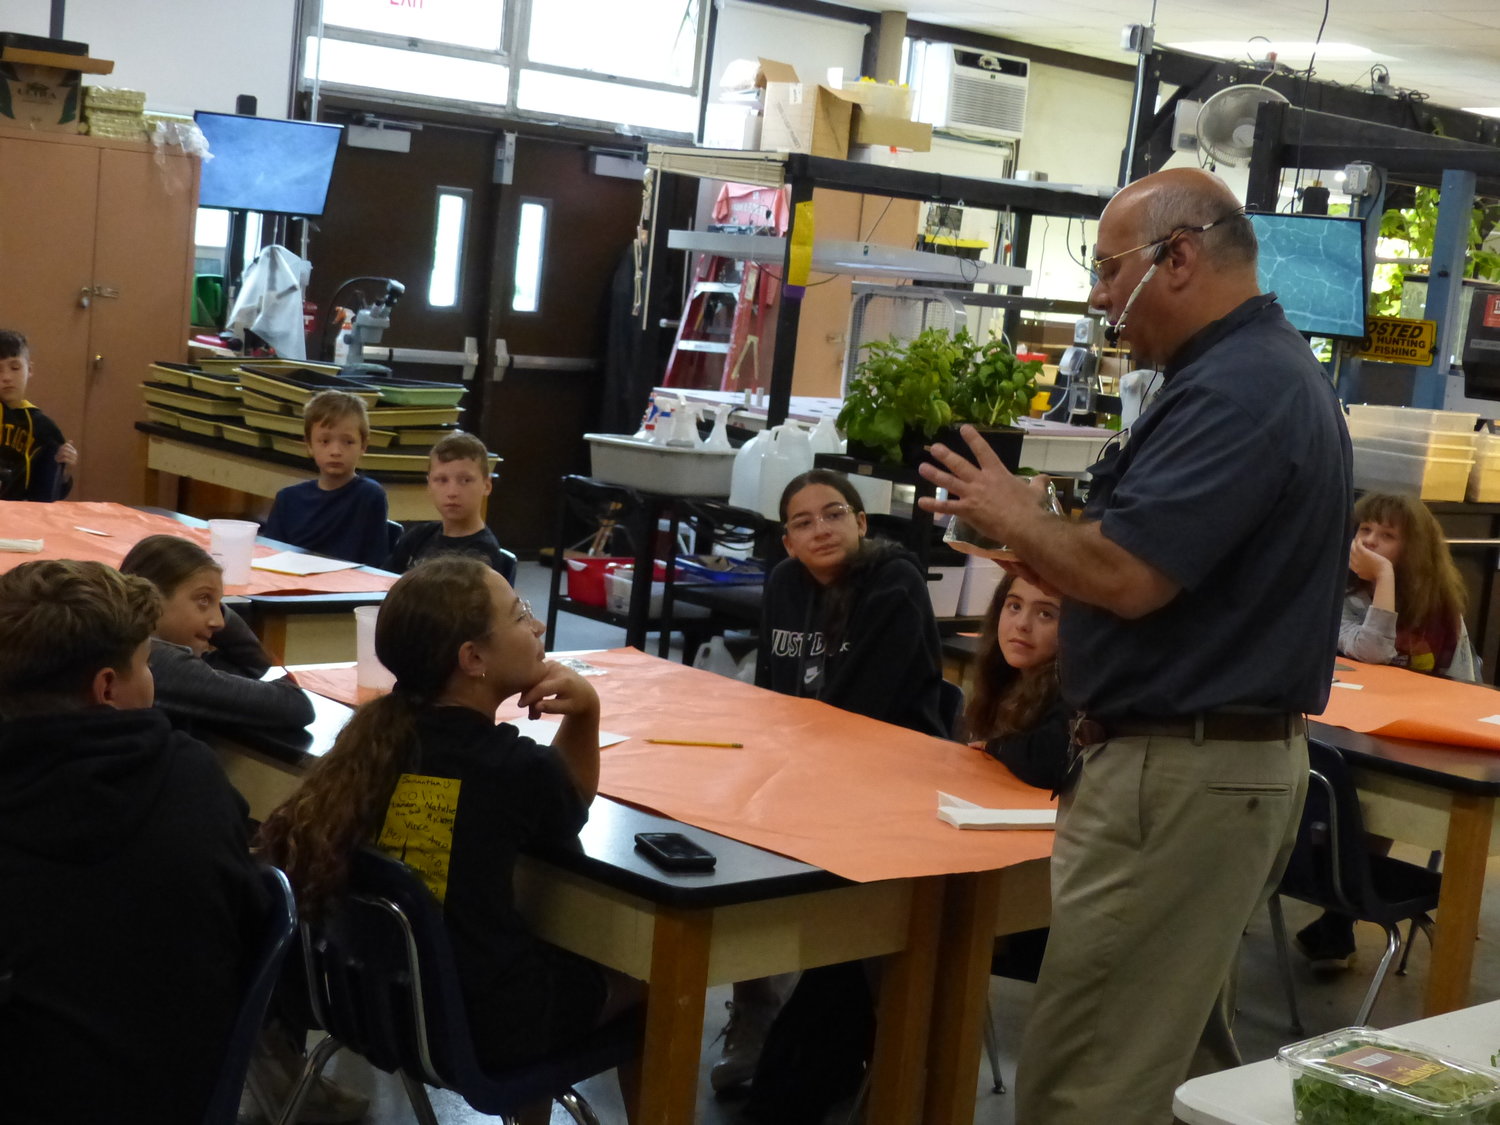 Salvatore Mule spoke to a class of students from Mandalay Elementary School, hoping to pique their interest in hydroponics early in their academic careers.